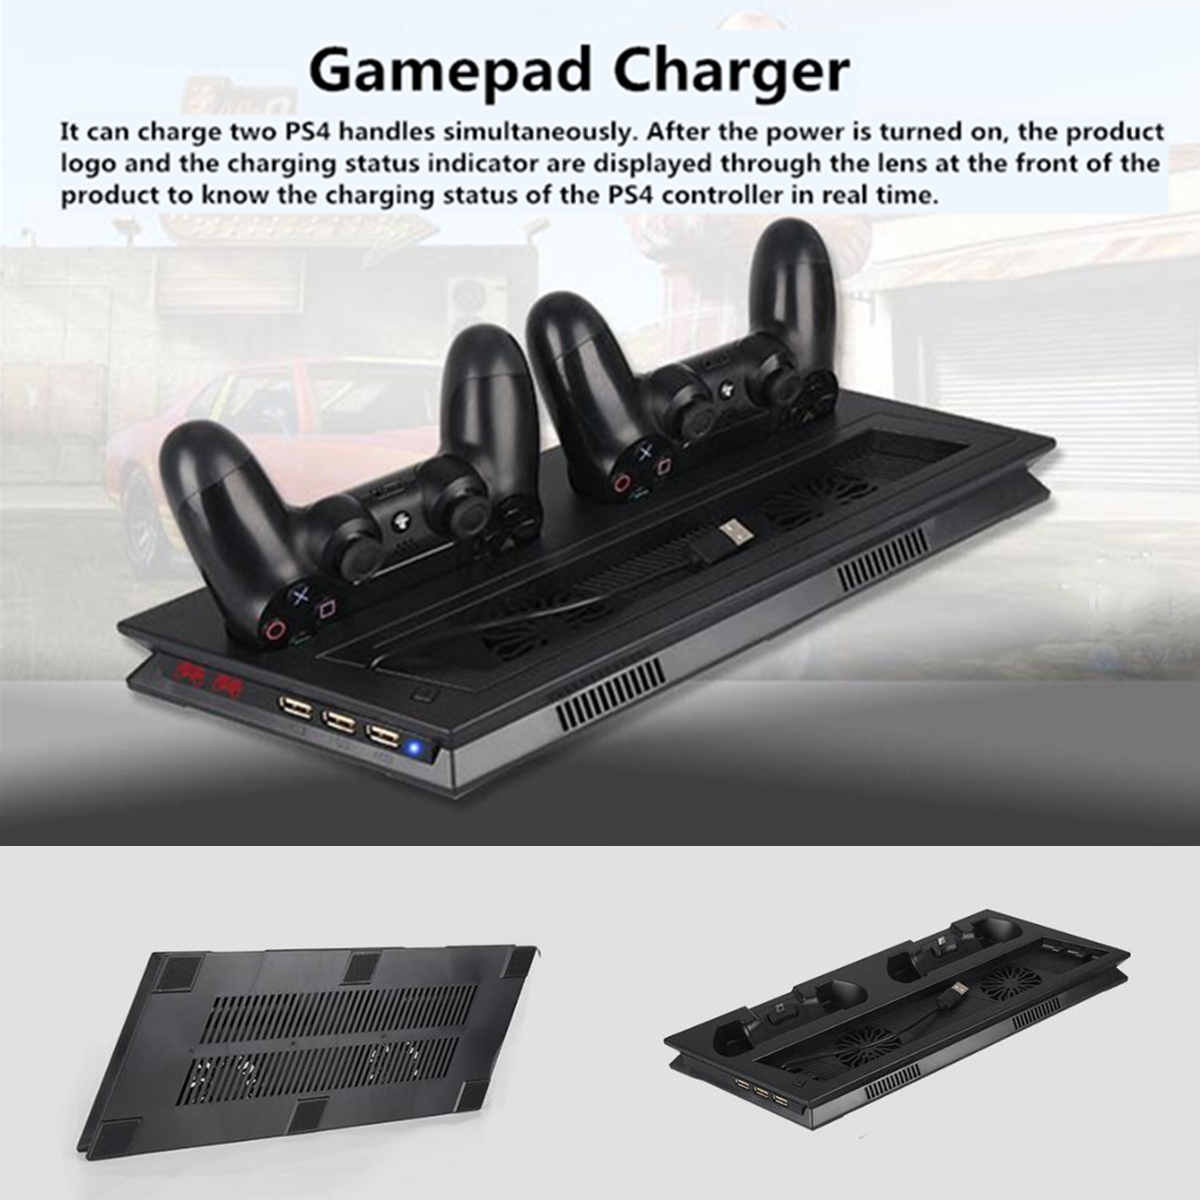 LED Charger Station Stand Charging Dock Cooling Fan for Sony Playstation 4 PS4 PRO Slim Game Console Gamepad 55